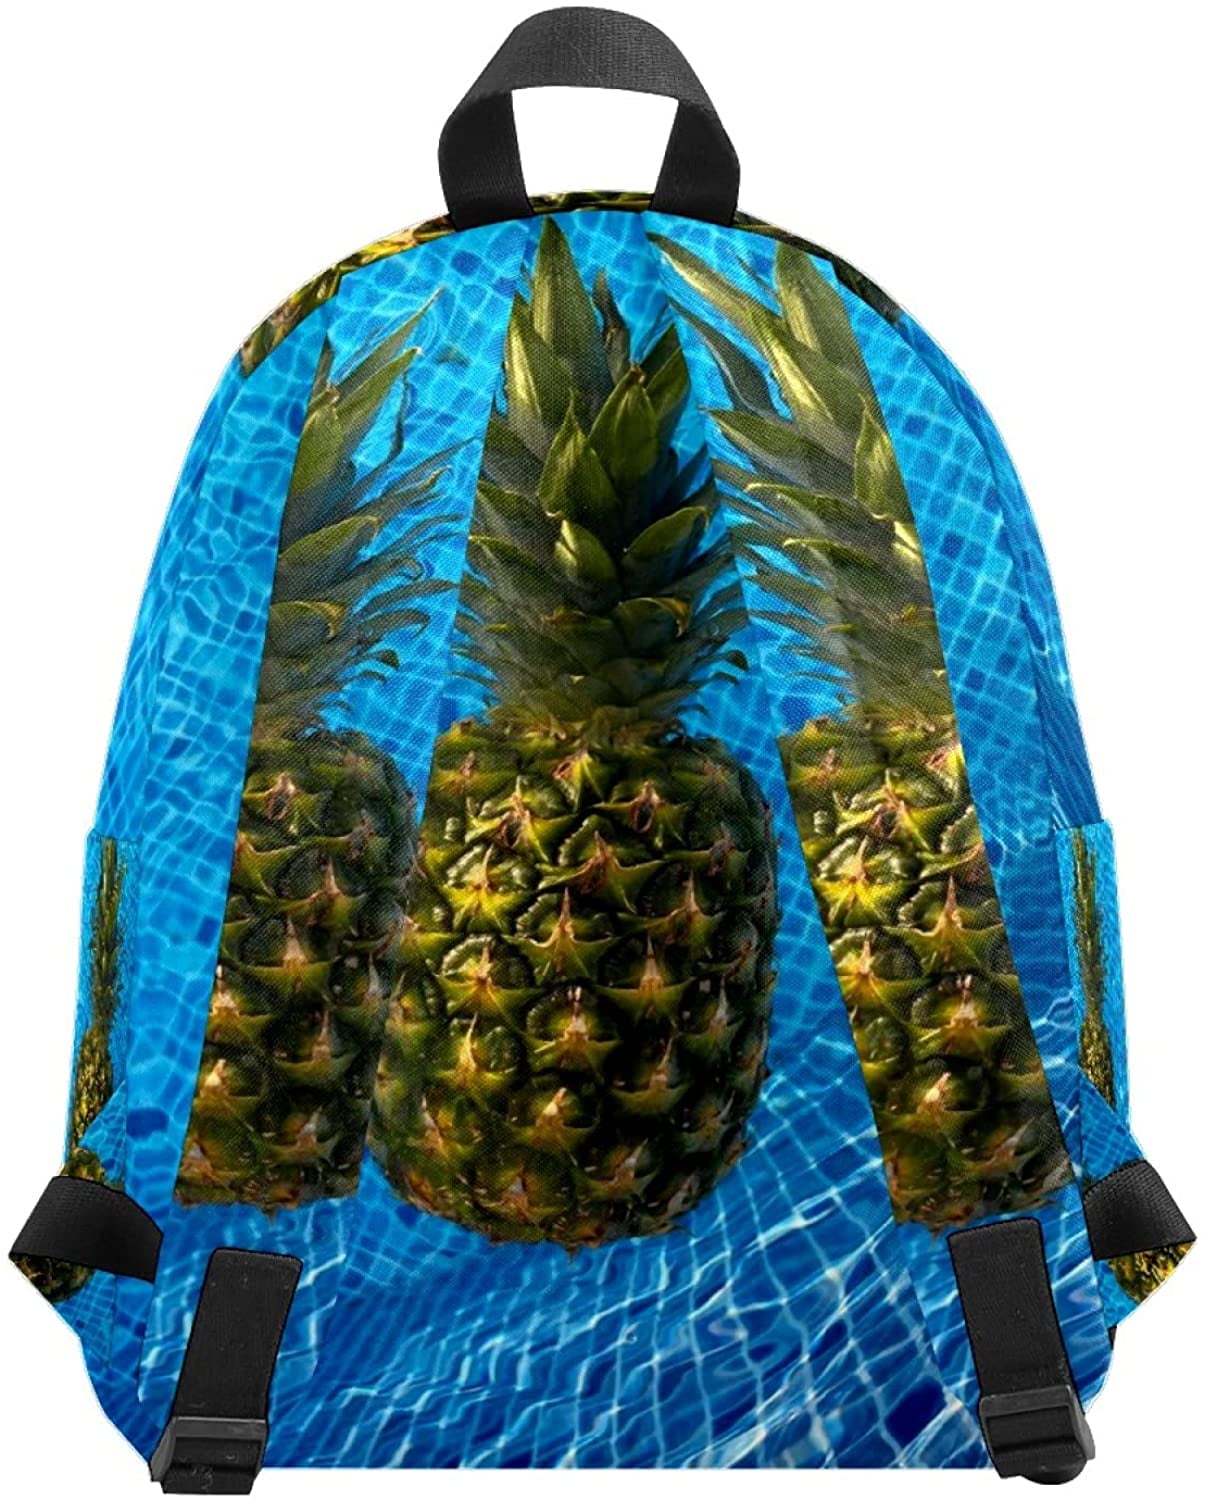 Pineapples Summer School Bookbags Computer Daypack for Travel Hiking Camping Laptop Backpack Boys Grils